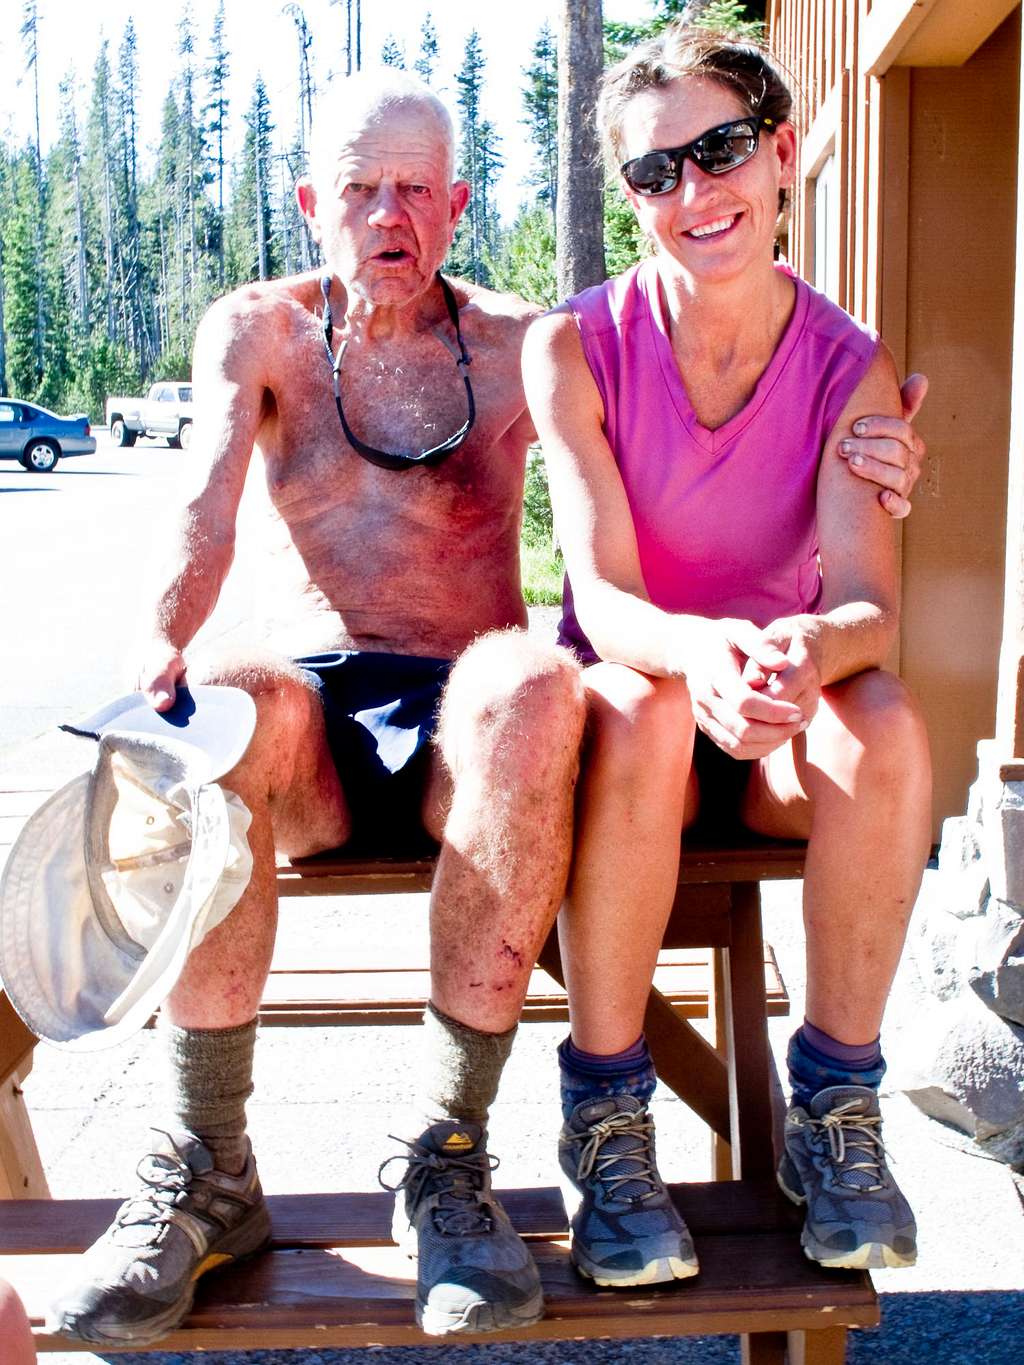 Post Hike Rest at the Mazama Store